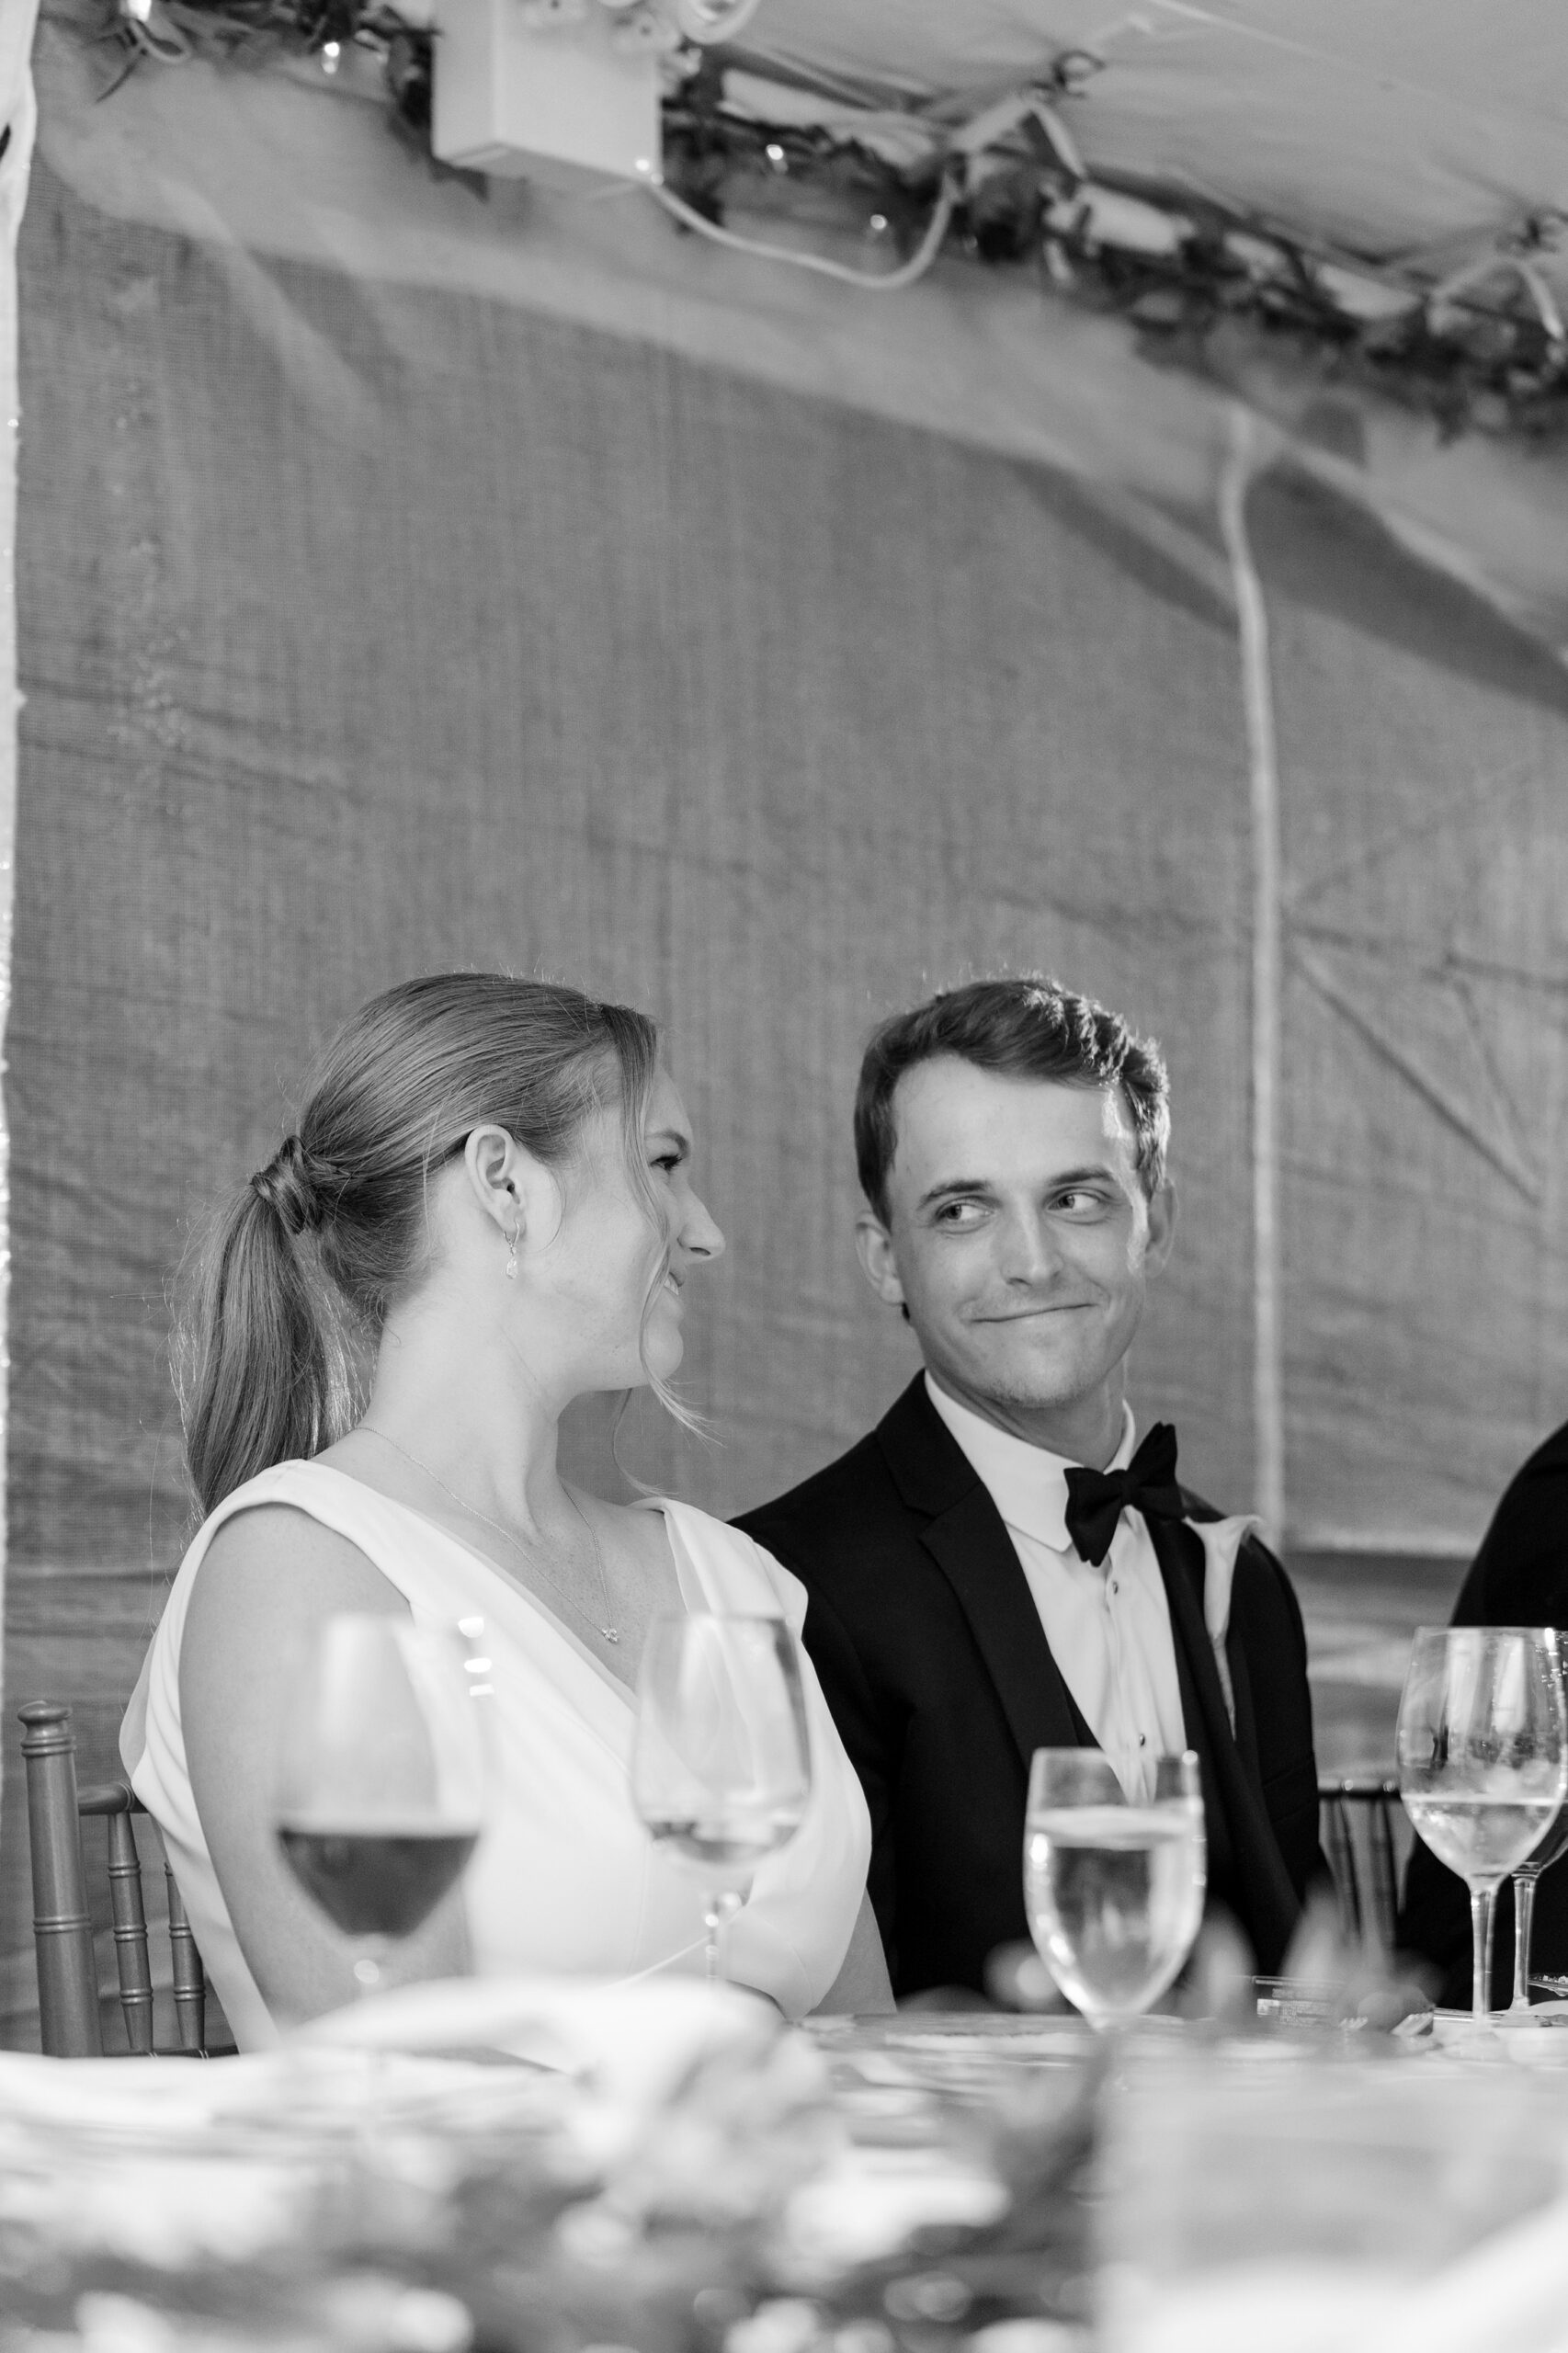 The couple smiled at each other during the Westmoreland Country Club wedding reception